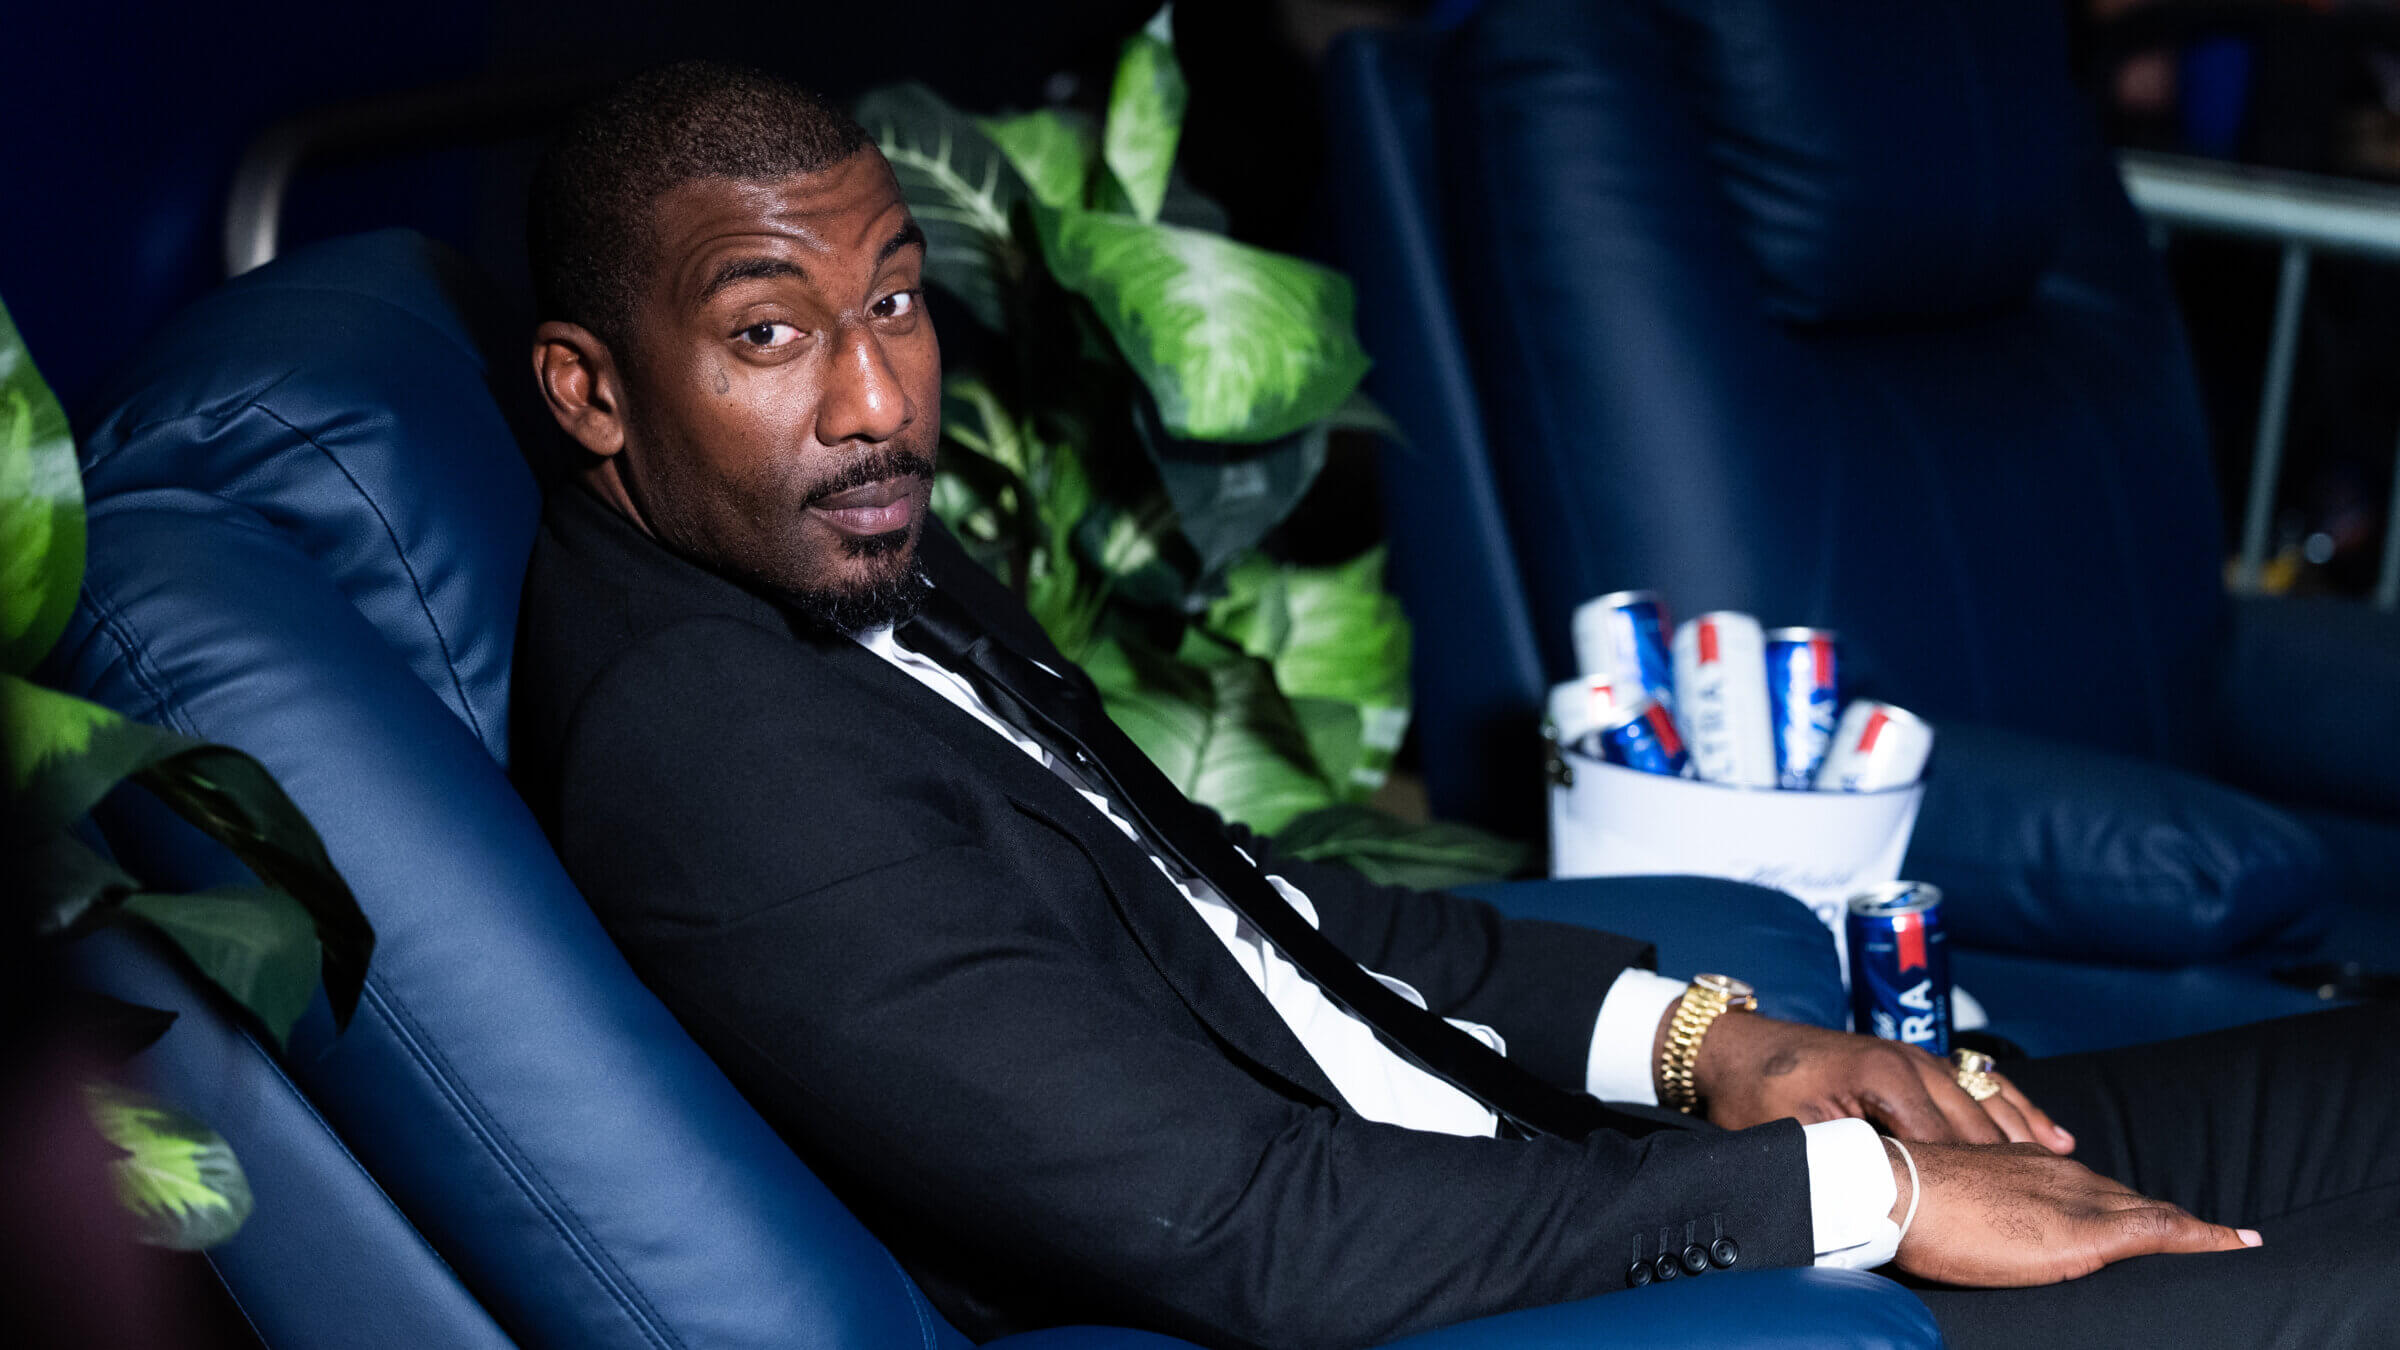 Former NBA star Amar'e Stoudemire, who converted to Judaism in 2020, invoked Hanukkah after he was arrested for allegedly punching his teenage daughter Sunday.